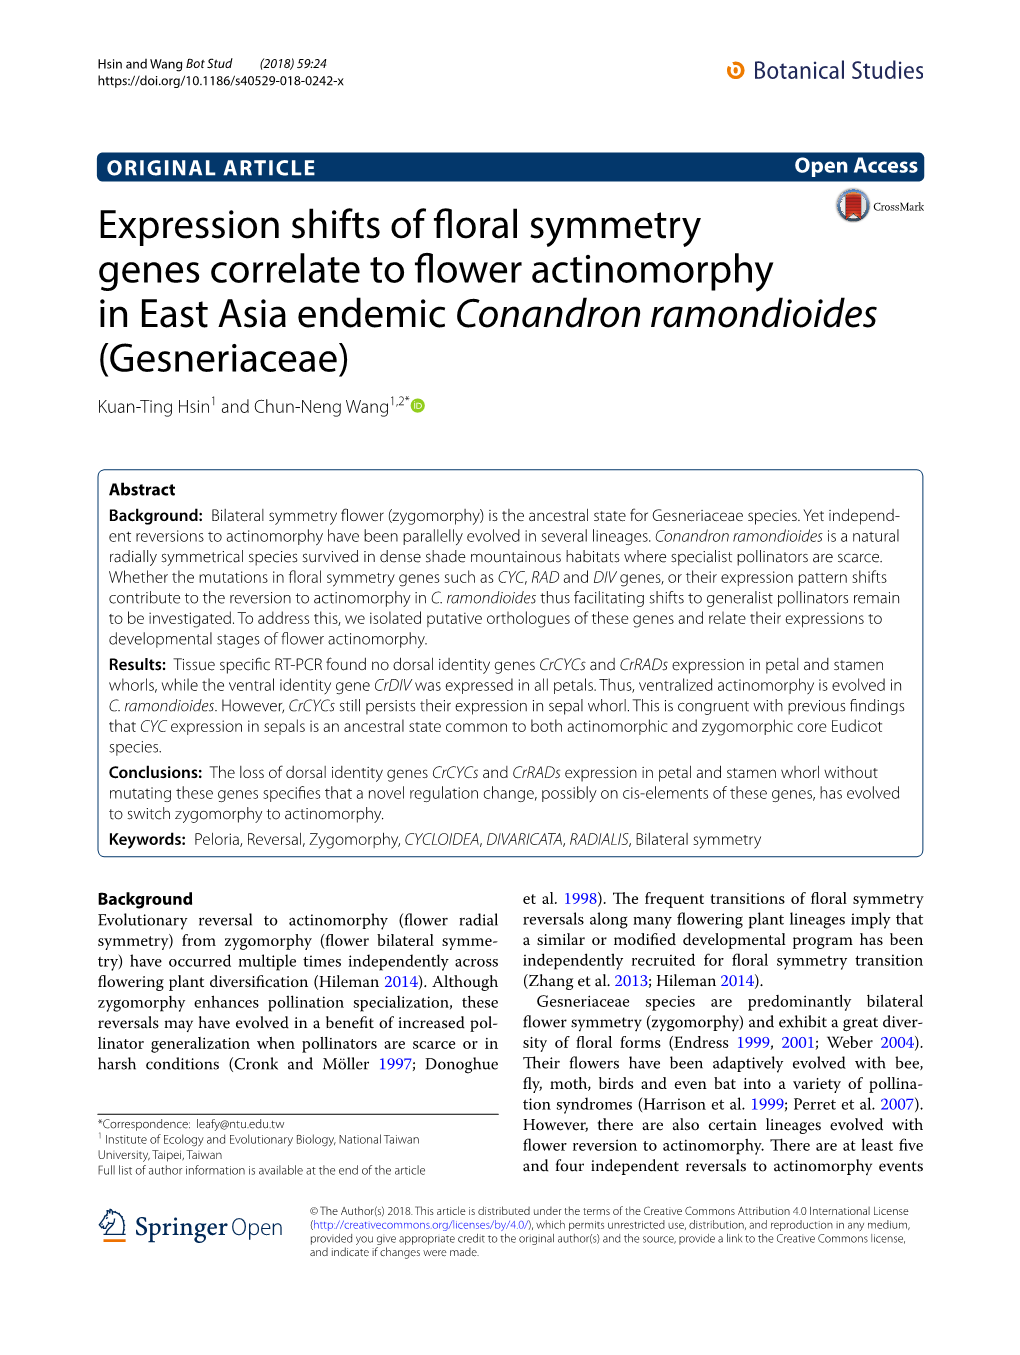 Expression Shifts of Floral Symmetry Genes Correlate